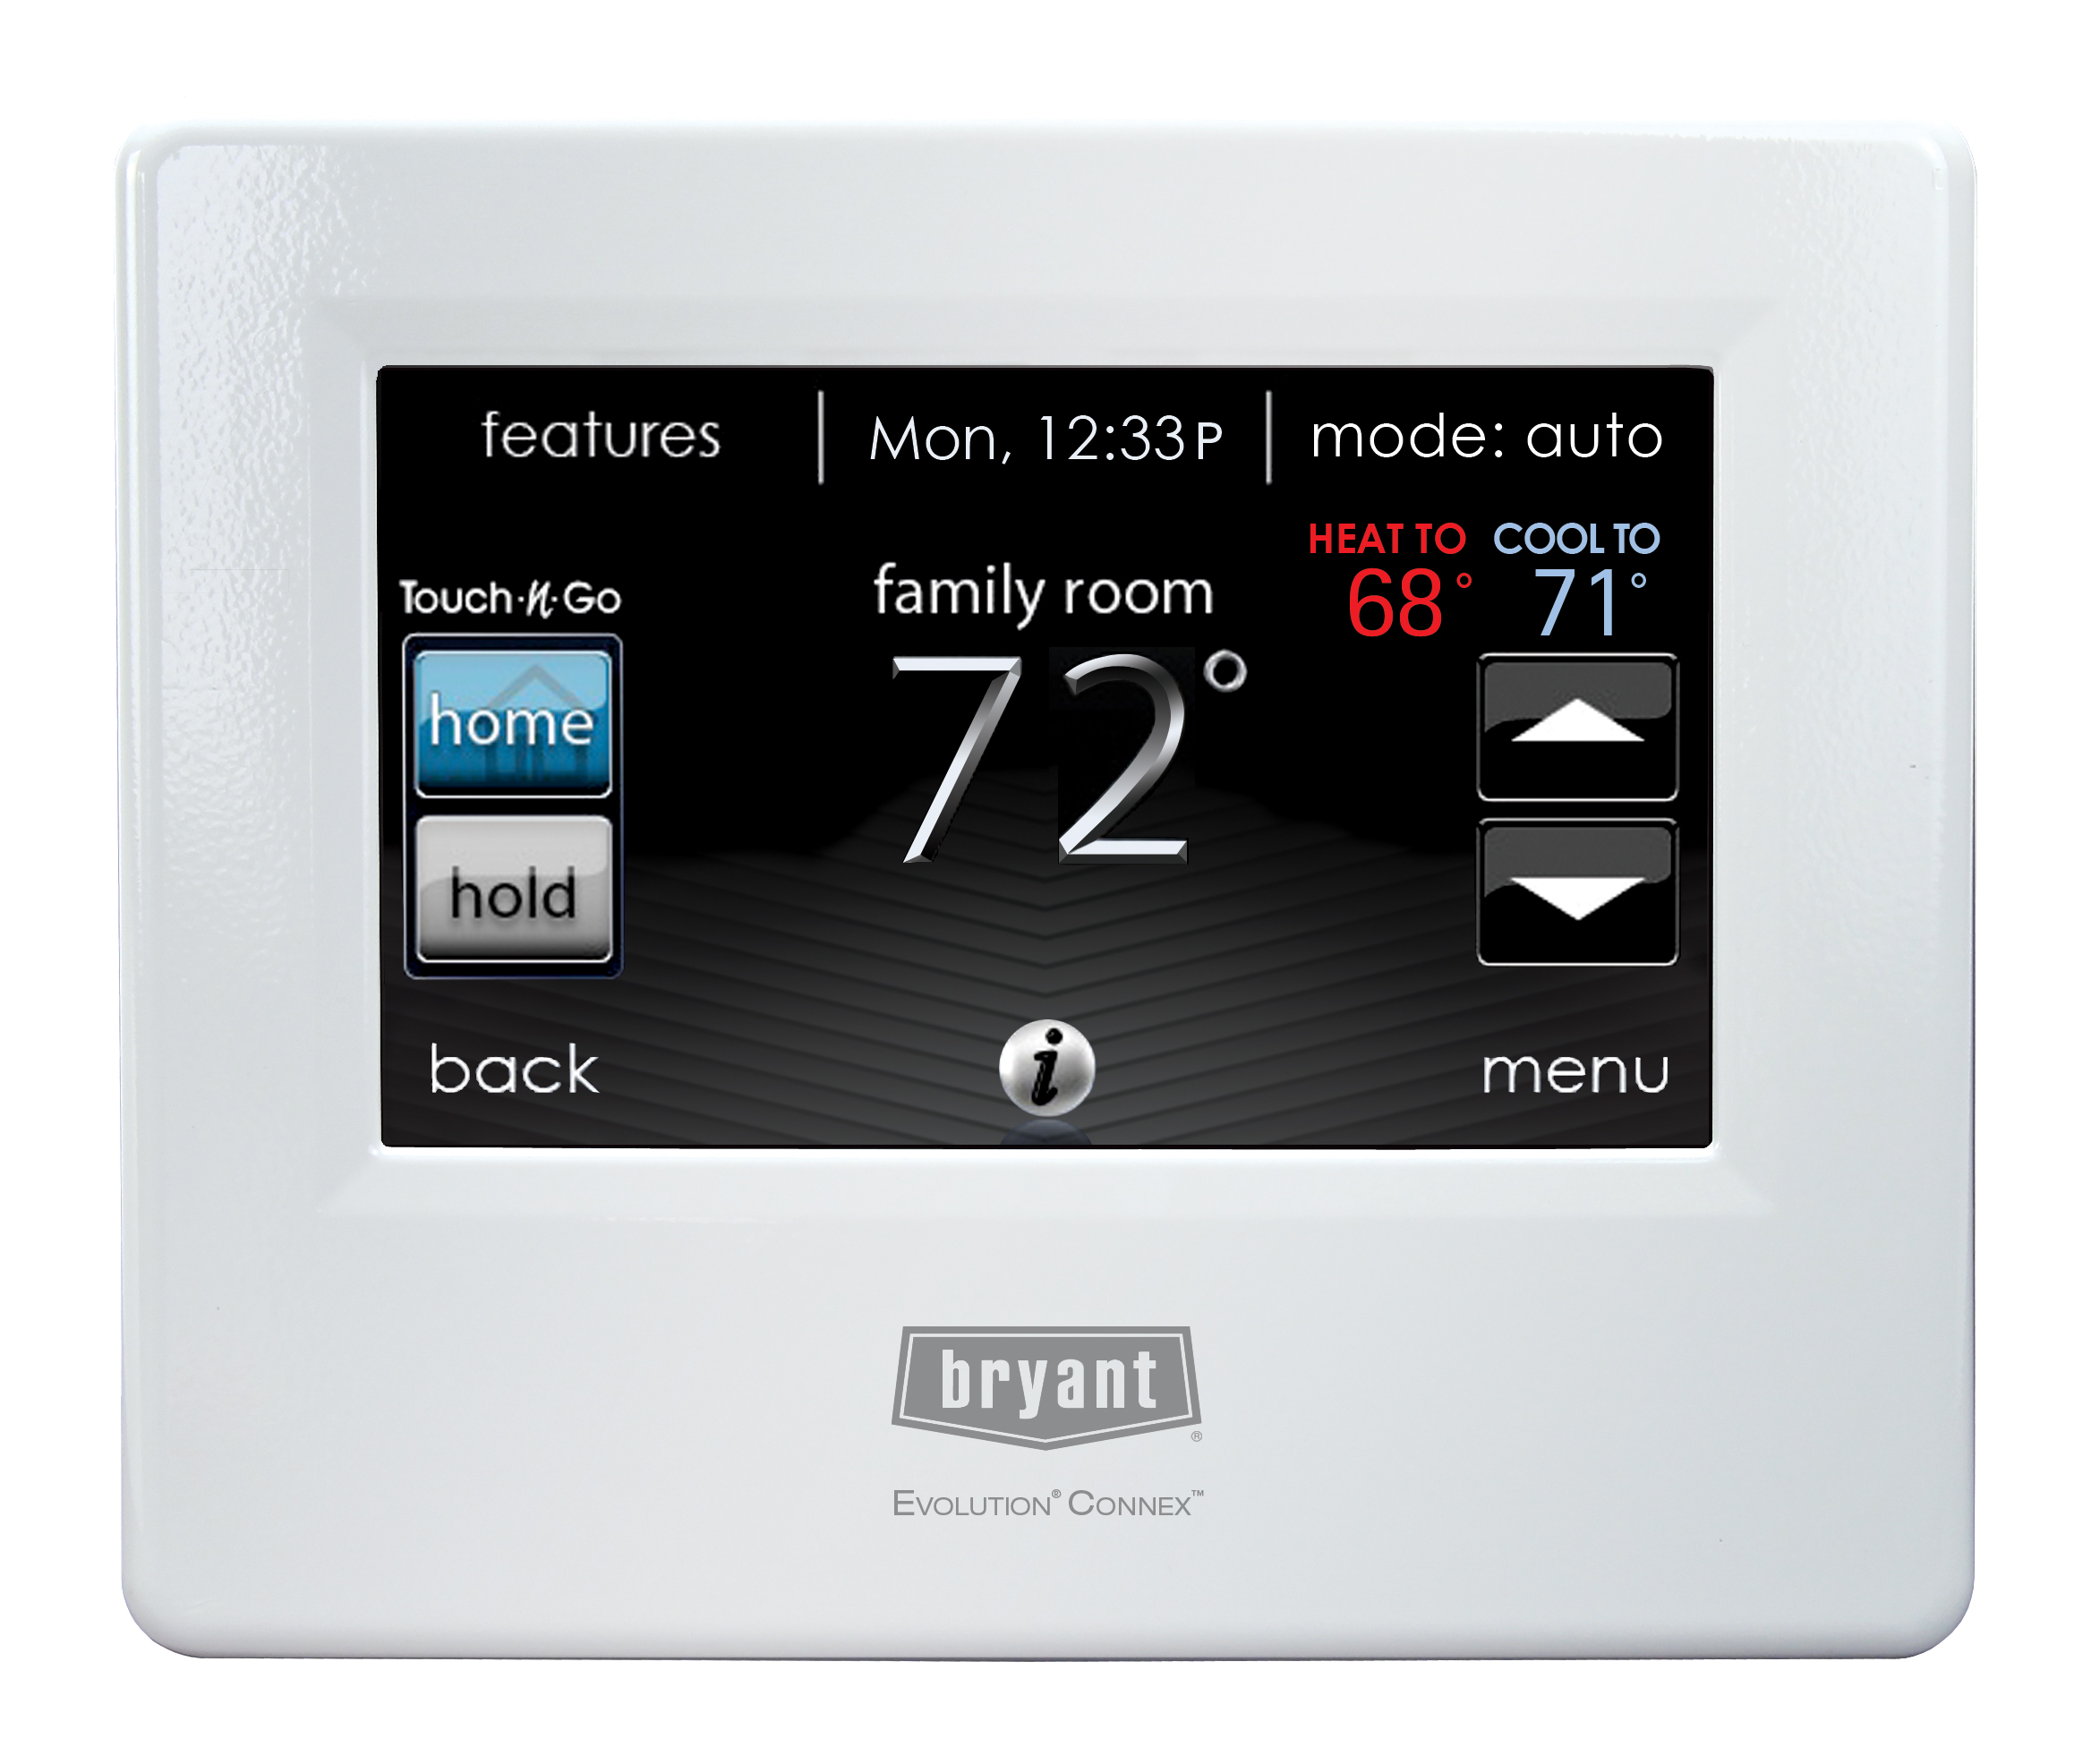 ask-our-experts-are-programmable-thermostats-worth-it-tuckey